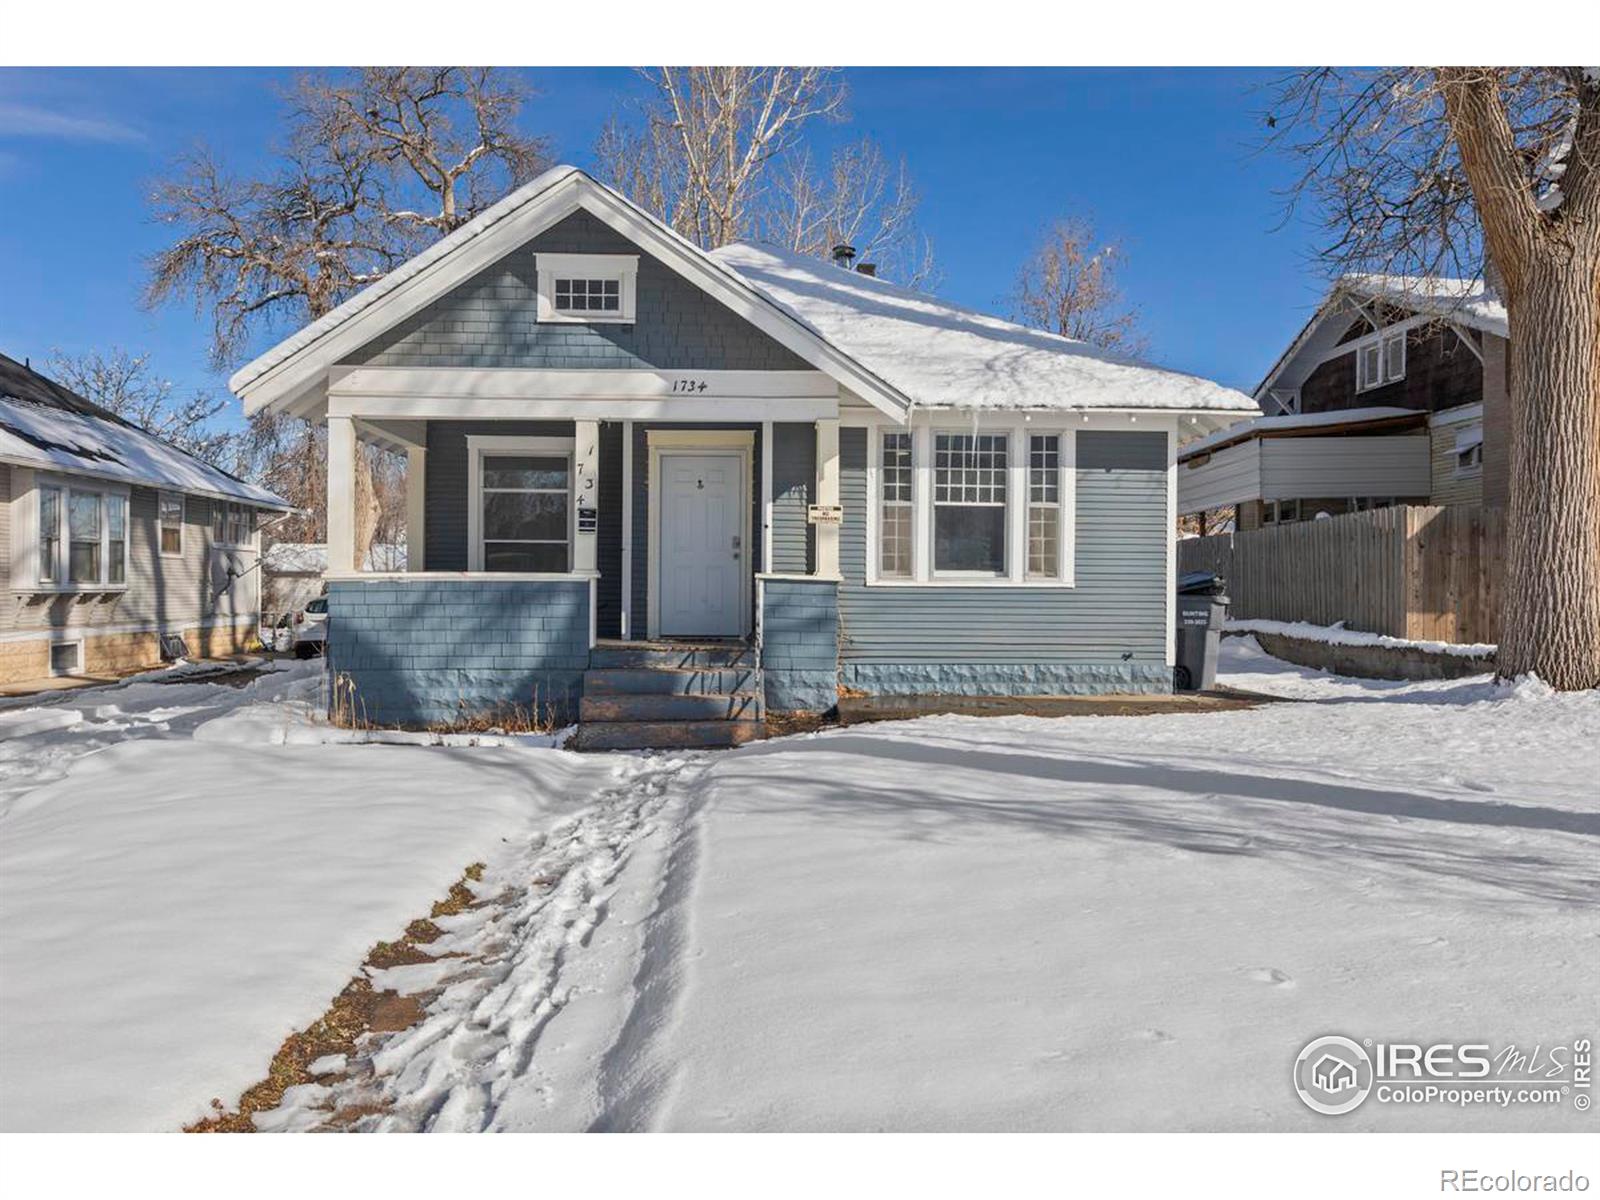 1734  7th Avenue, greeley MLS: 4567891003255 Beds: 6 Baths: 2 Price: $395,000